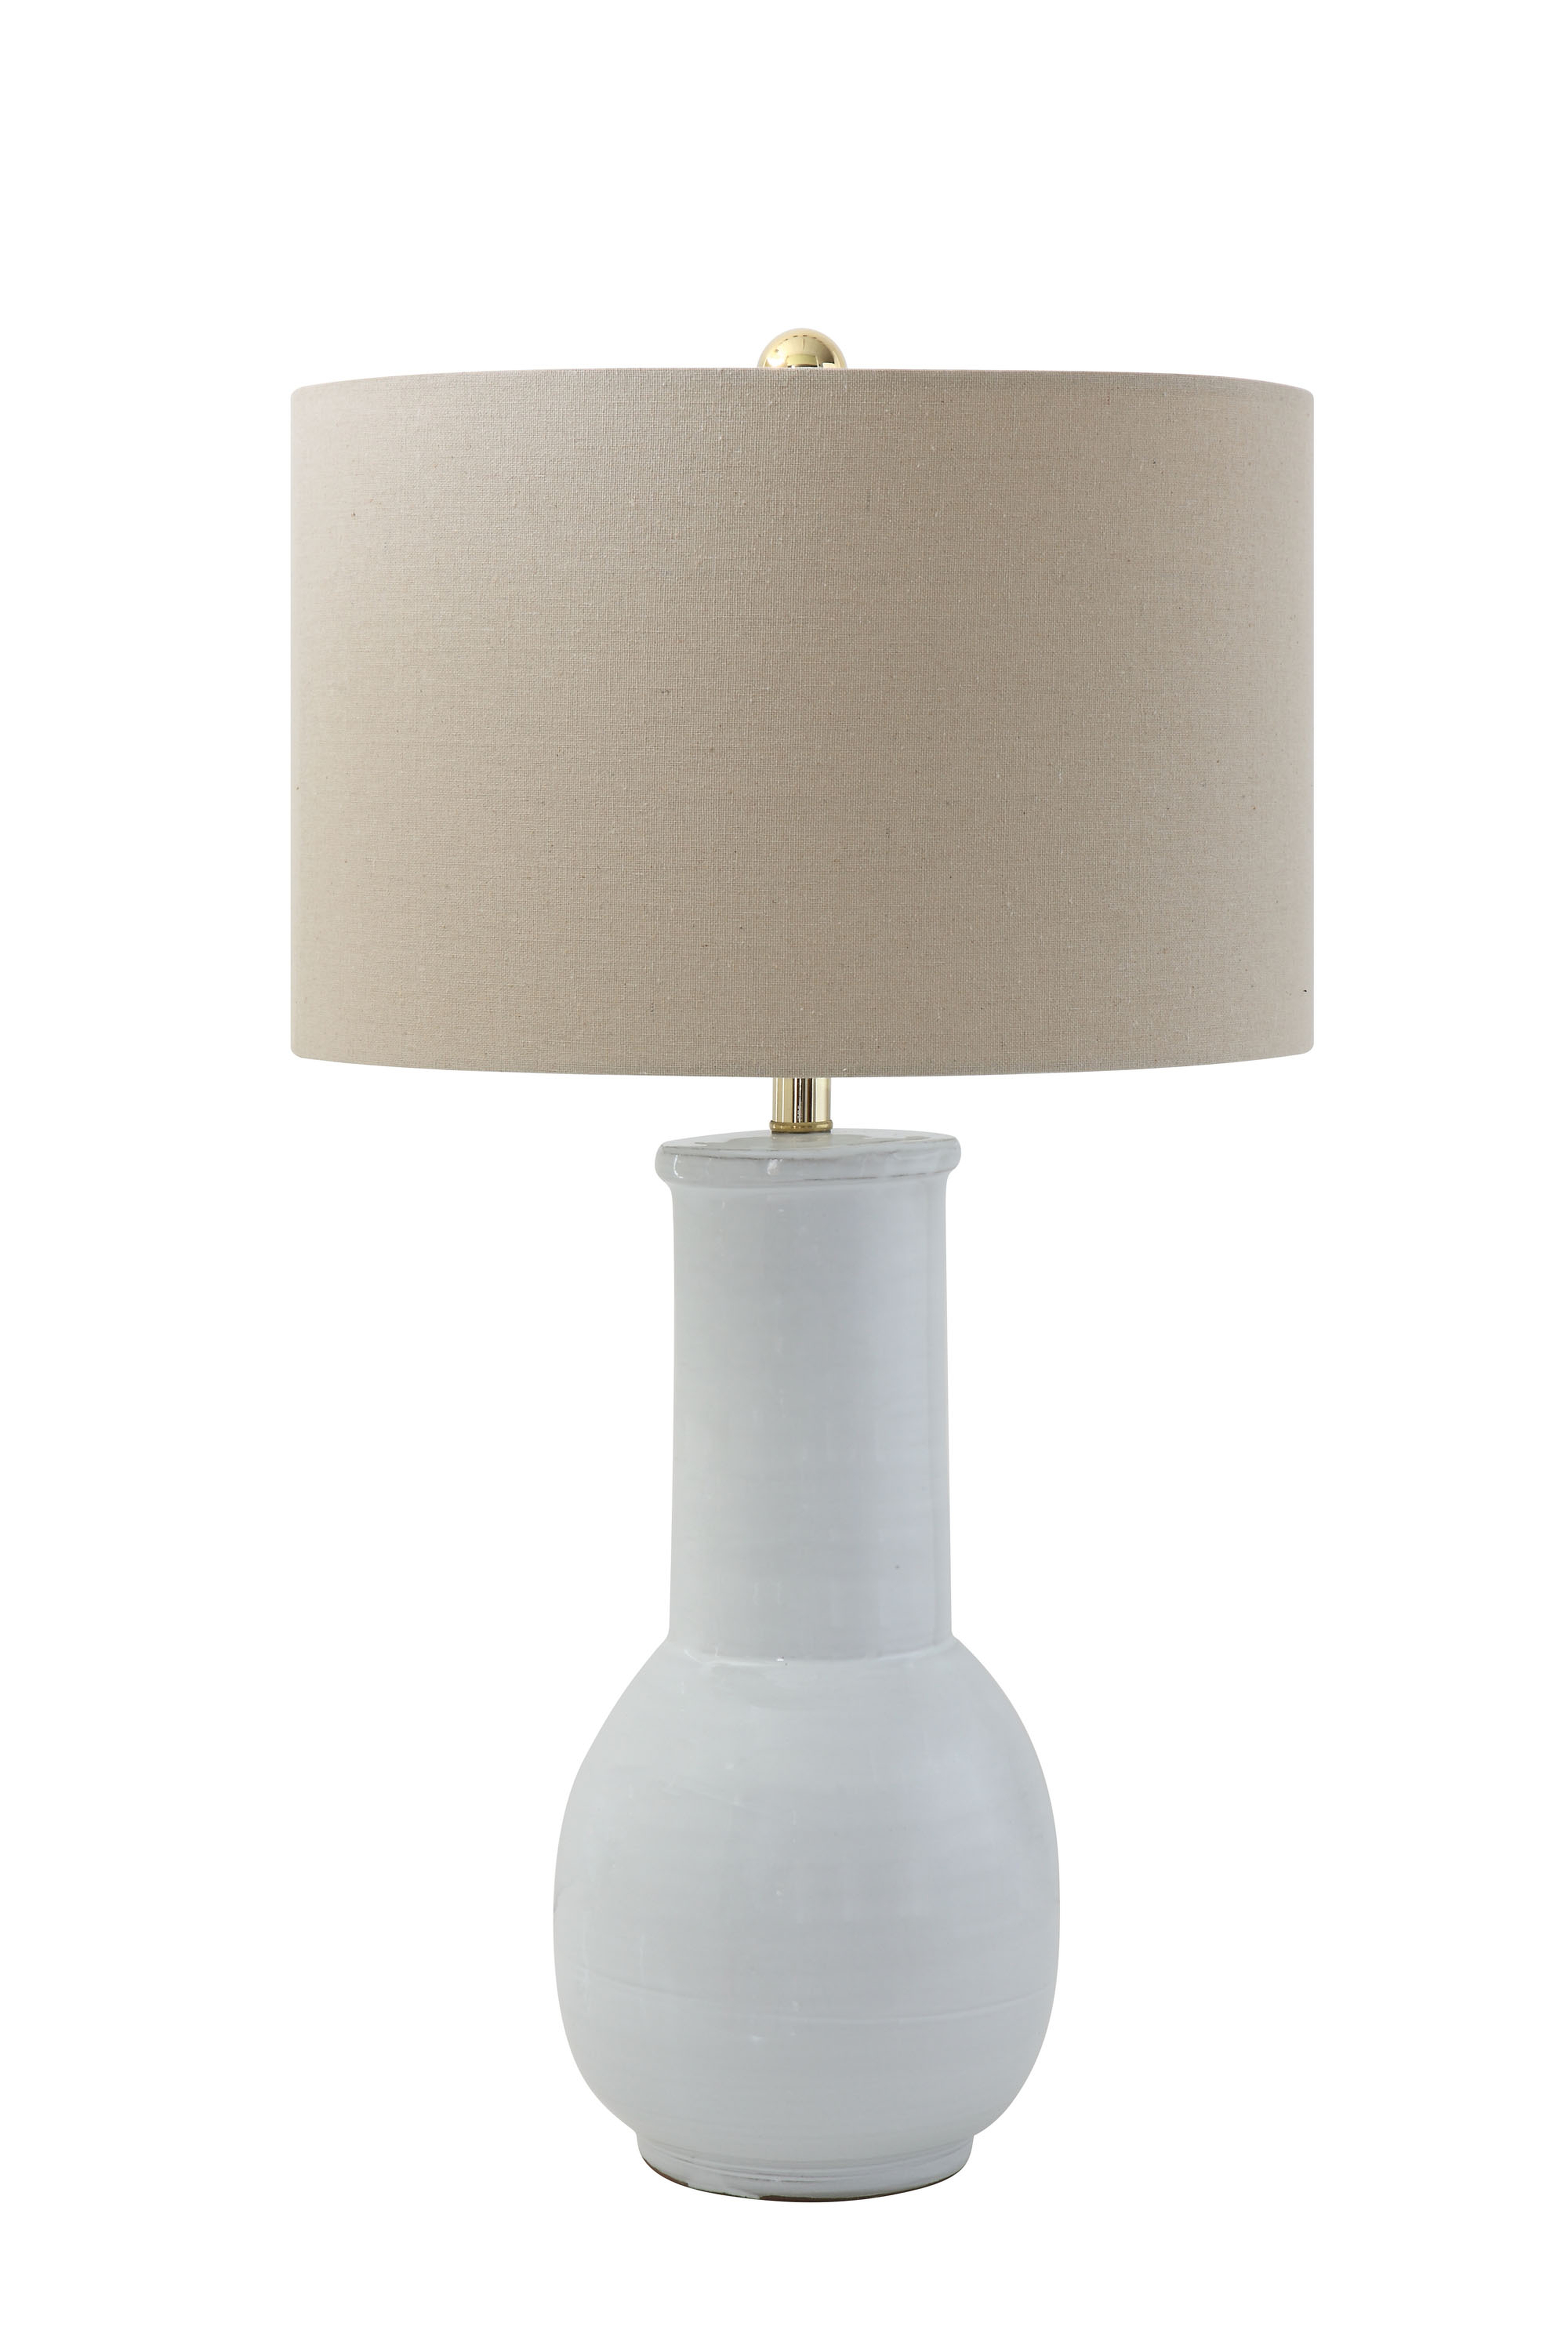 White Terracotta Table Lamp with Natural Linen Shade - Nomad Home